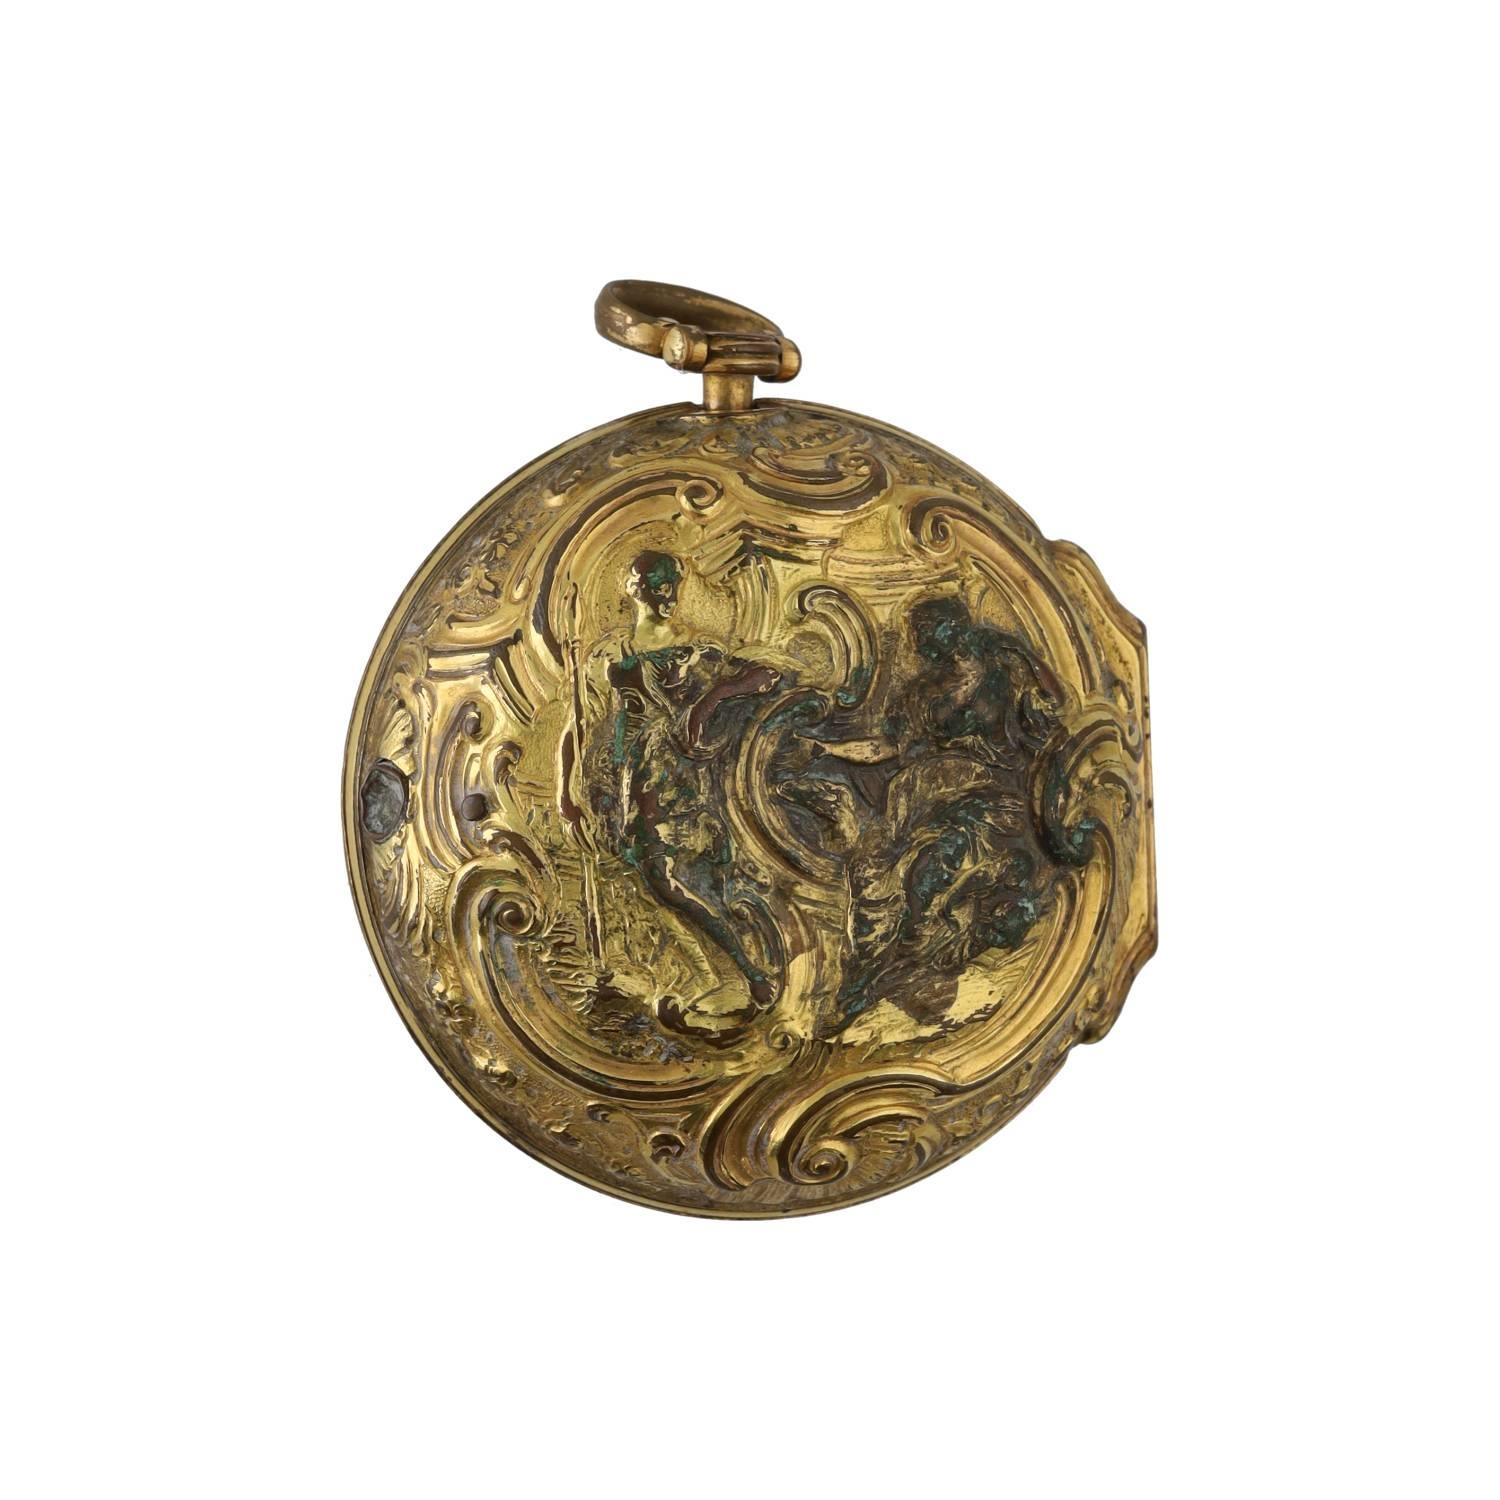 Pink, London - English 18th century gilt metal verge repousse pair cased pocket watch for repair, - Image 2 of 3